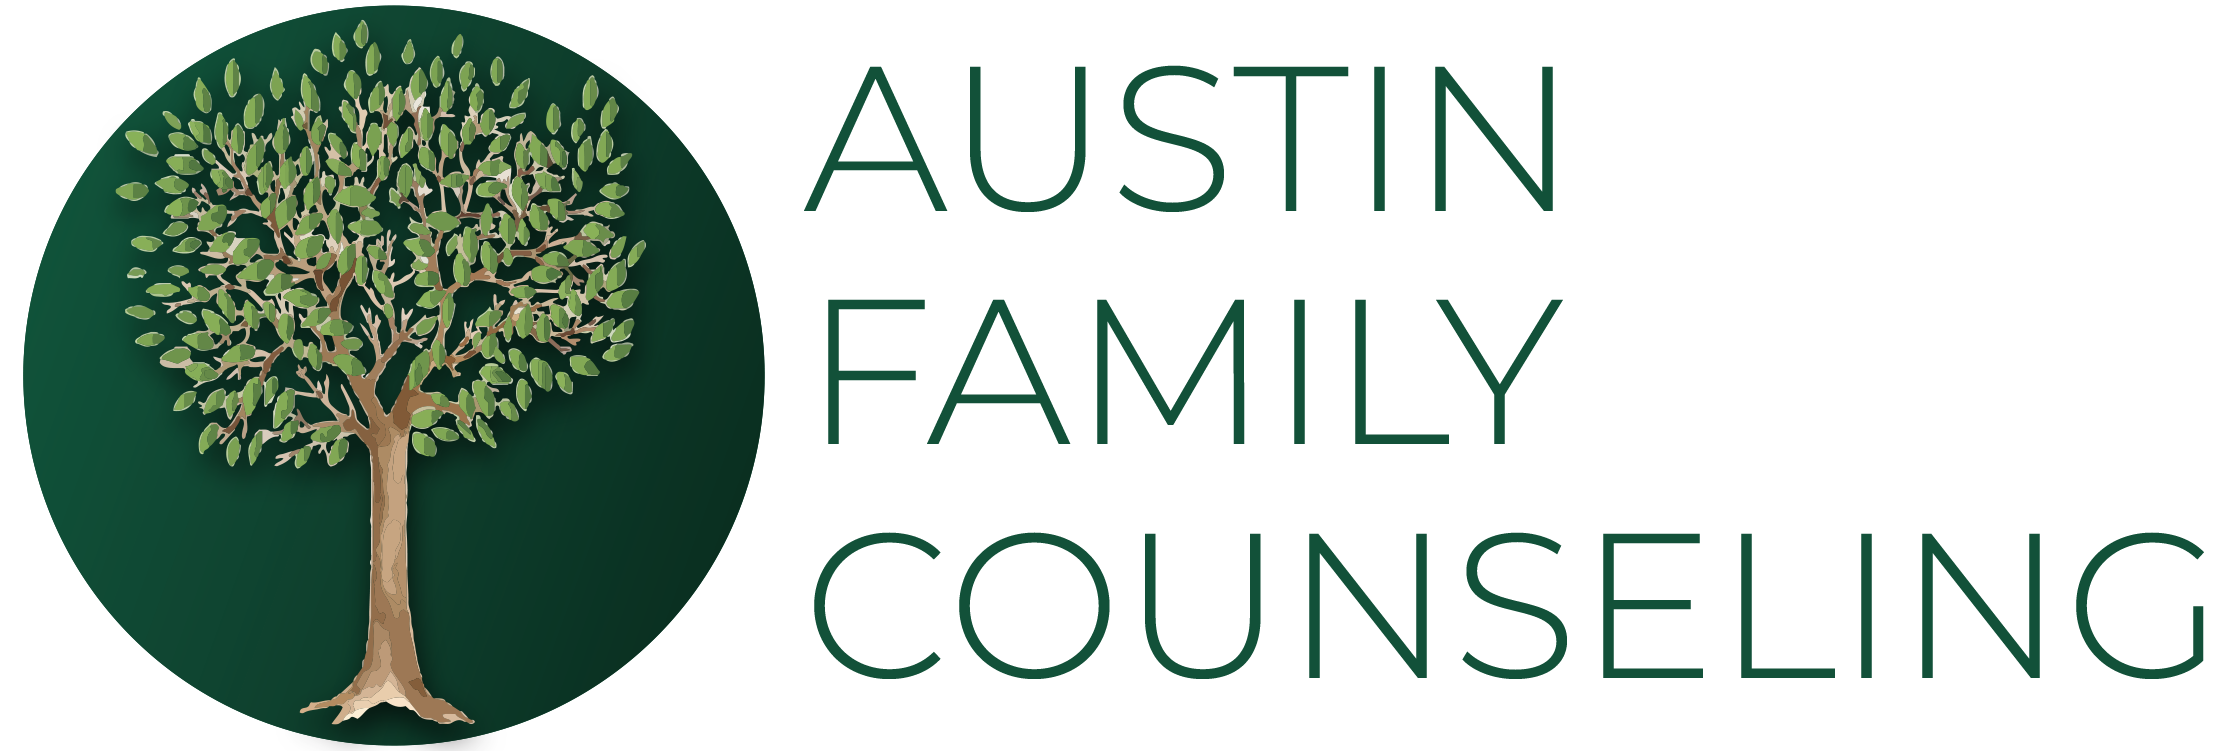 austin family counseling title and logo